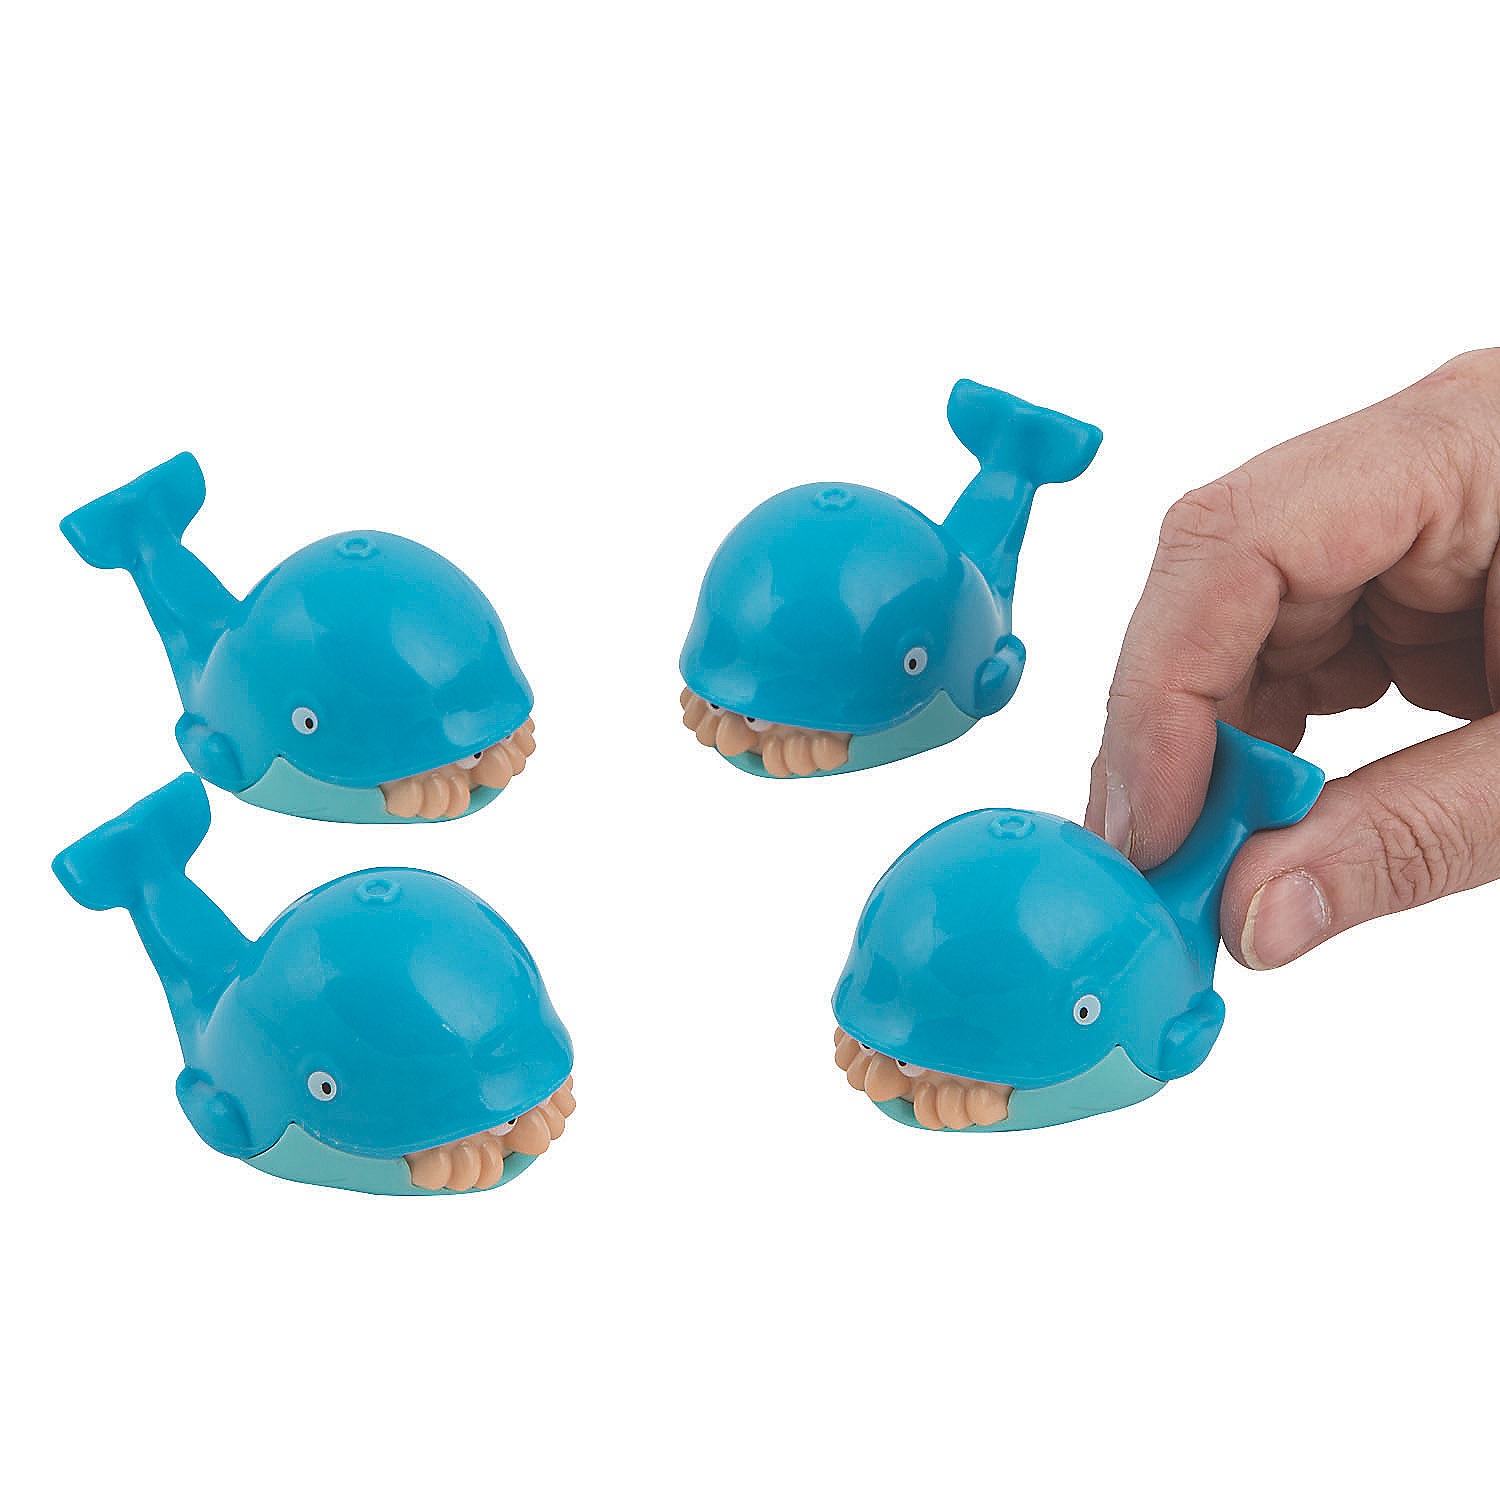 jonah-and-the-whale-pull-back-toys-12-pc-_13845514